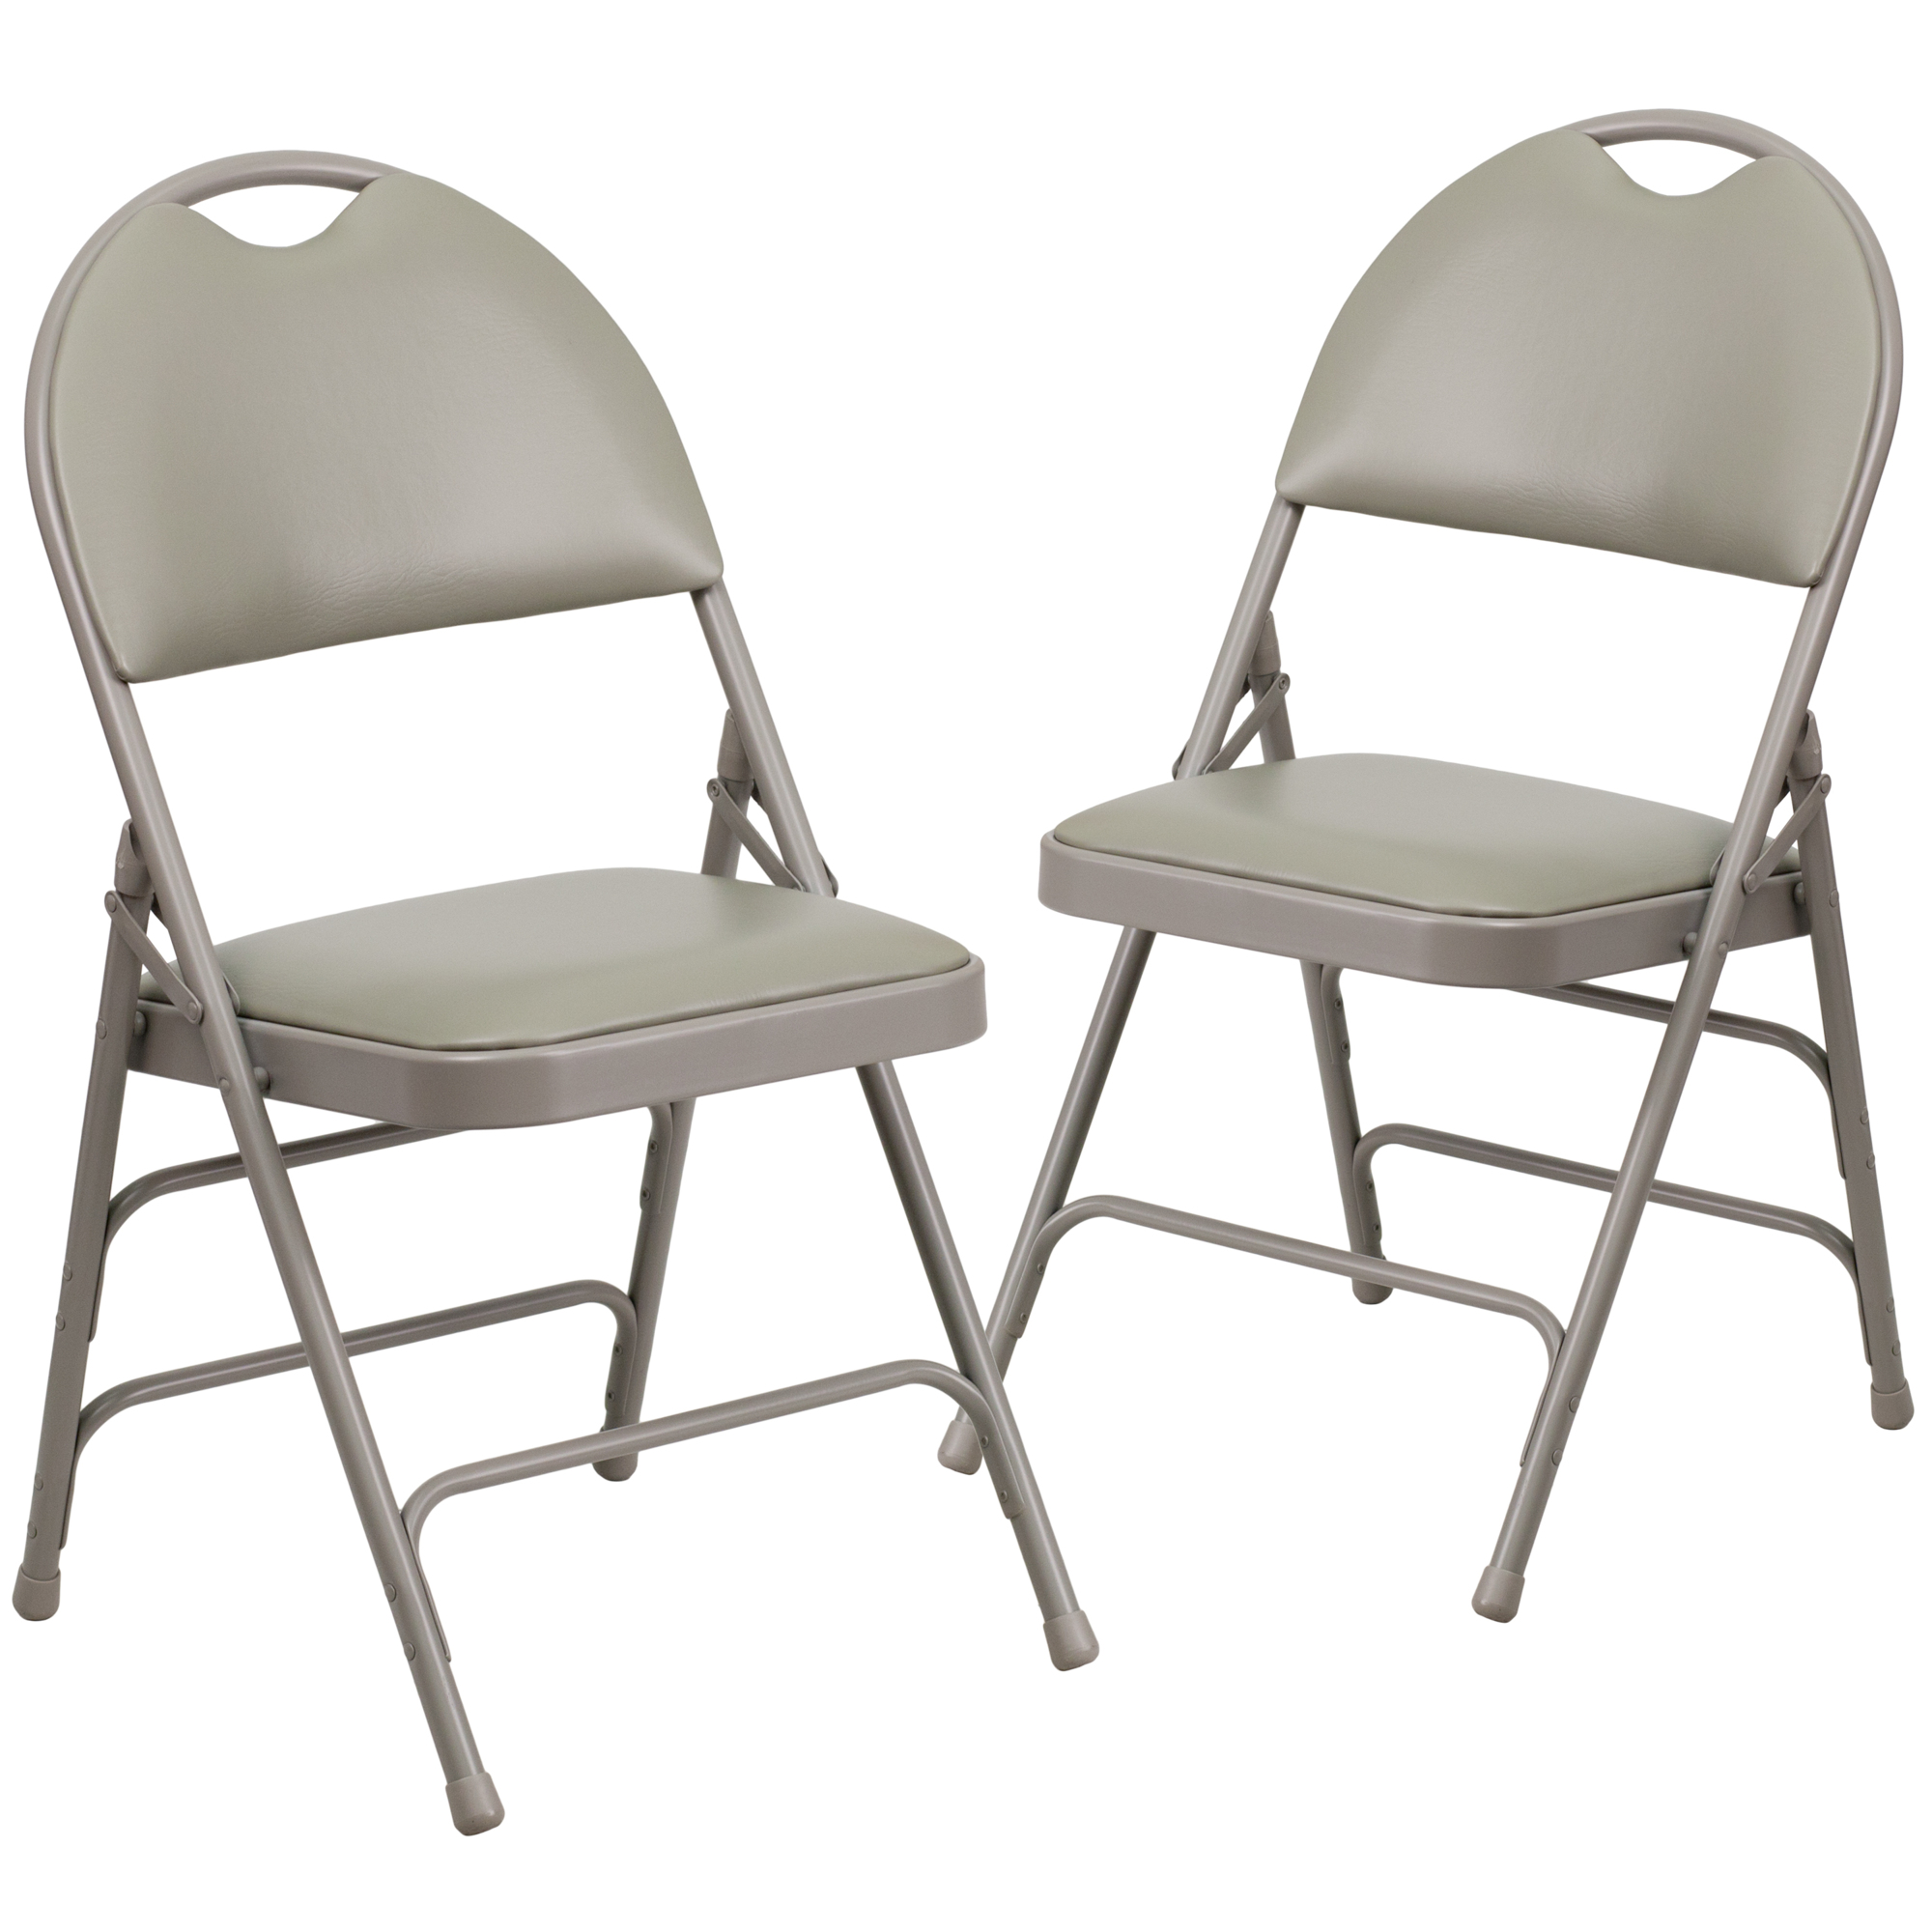 Flash Furniture, 2Pack Triple Braced Gray Vinyl Metal Folding Chair, Primary Color Gray, Included (qty.) 2, Model 2HAMC705AV3GY